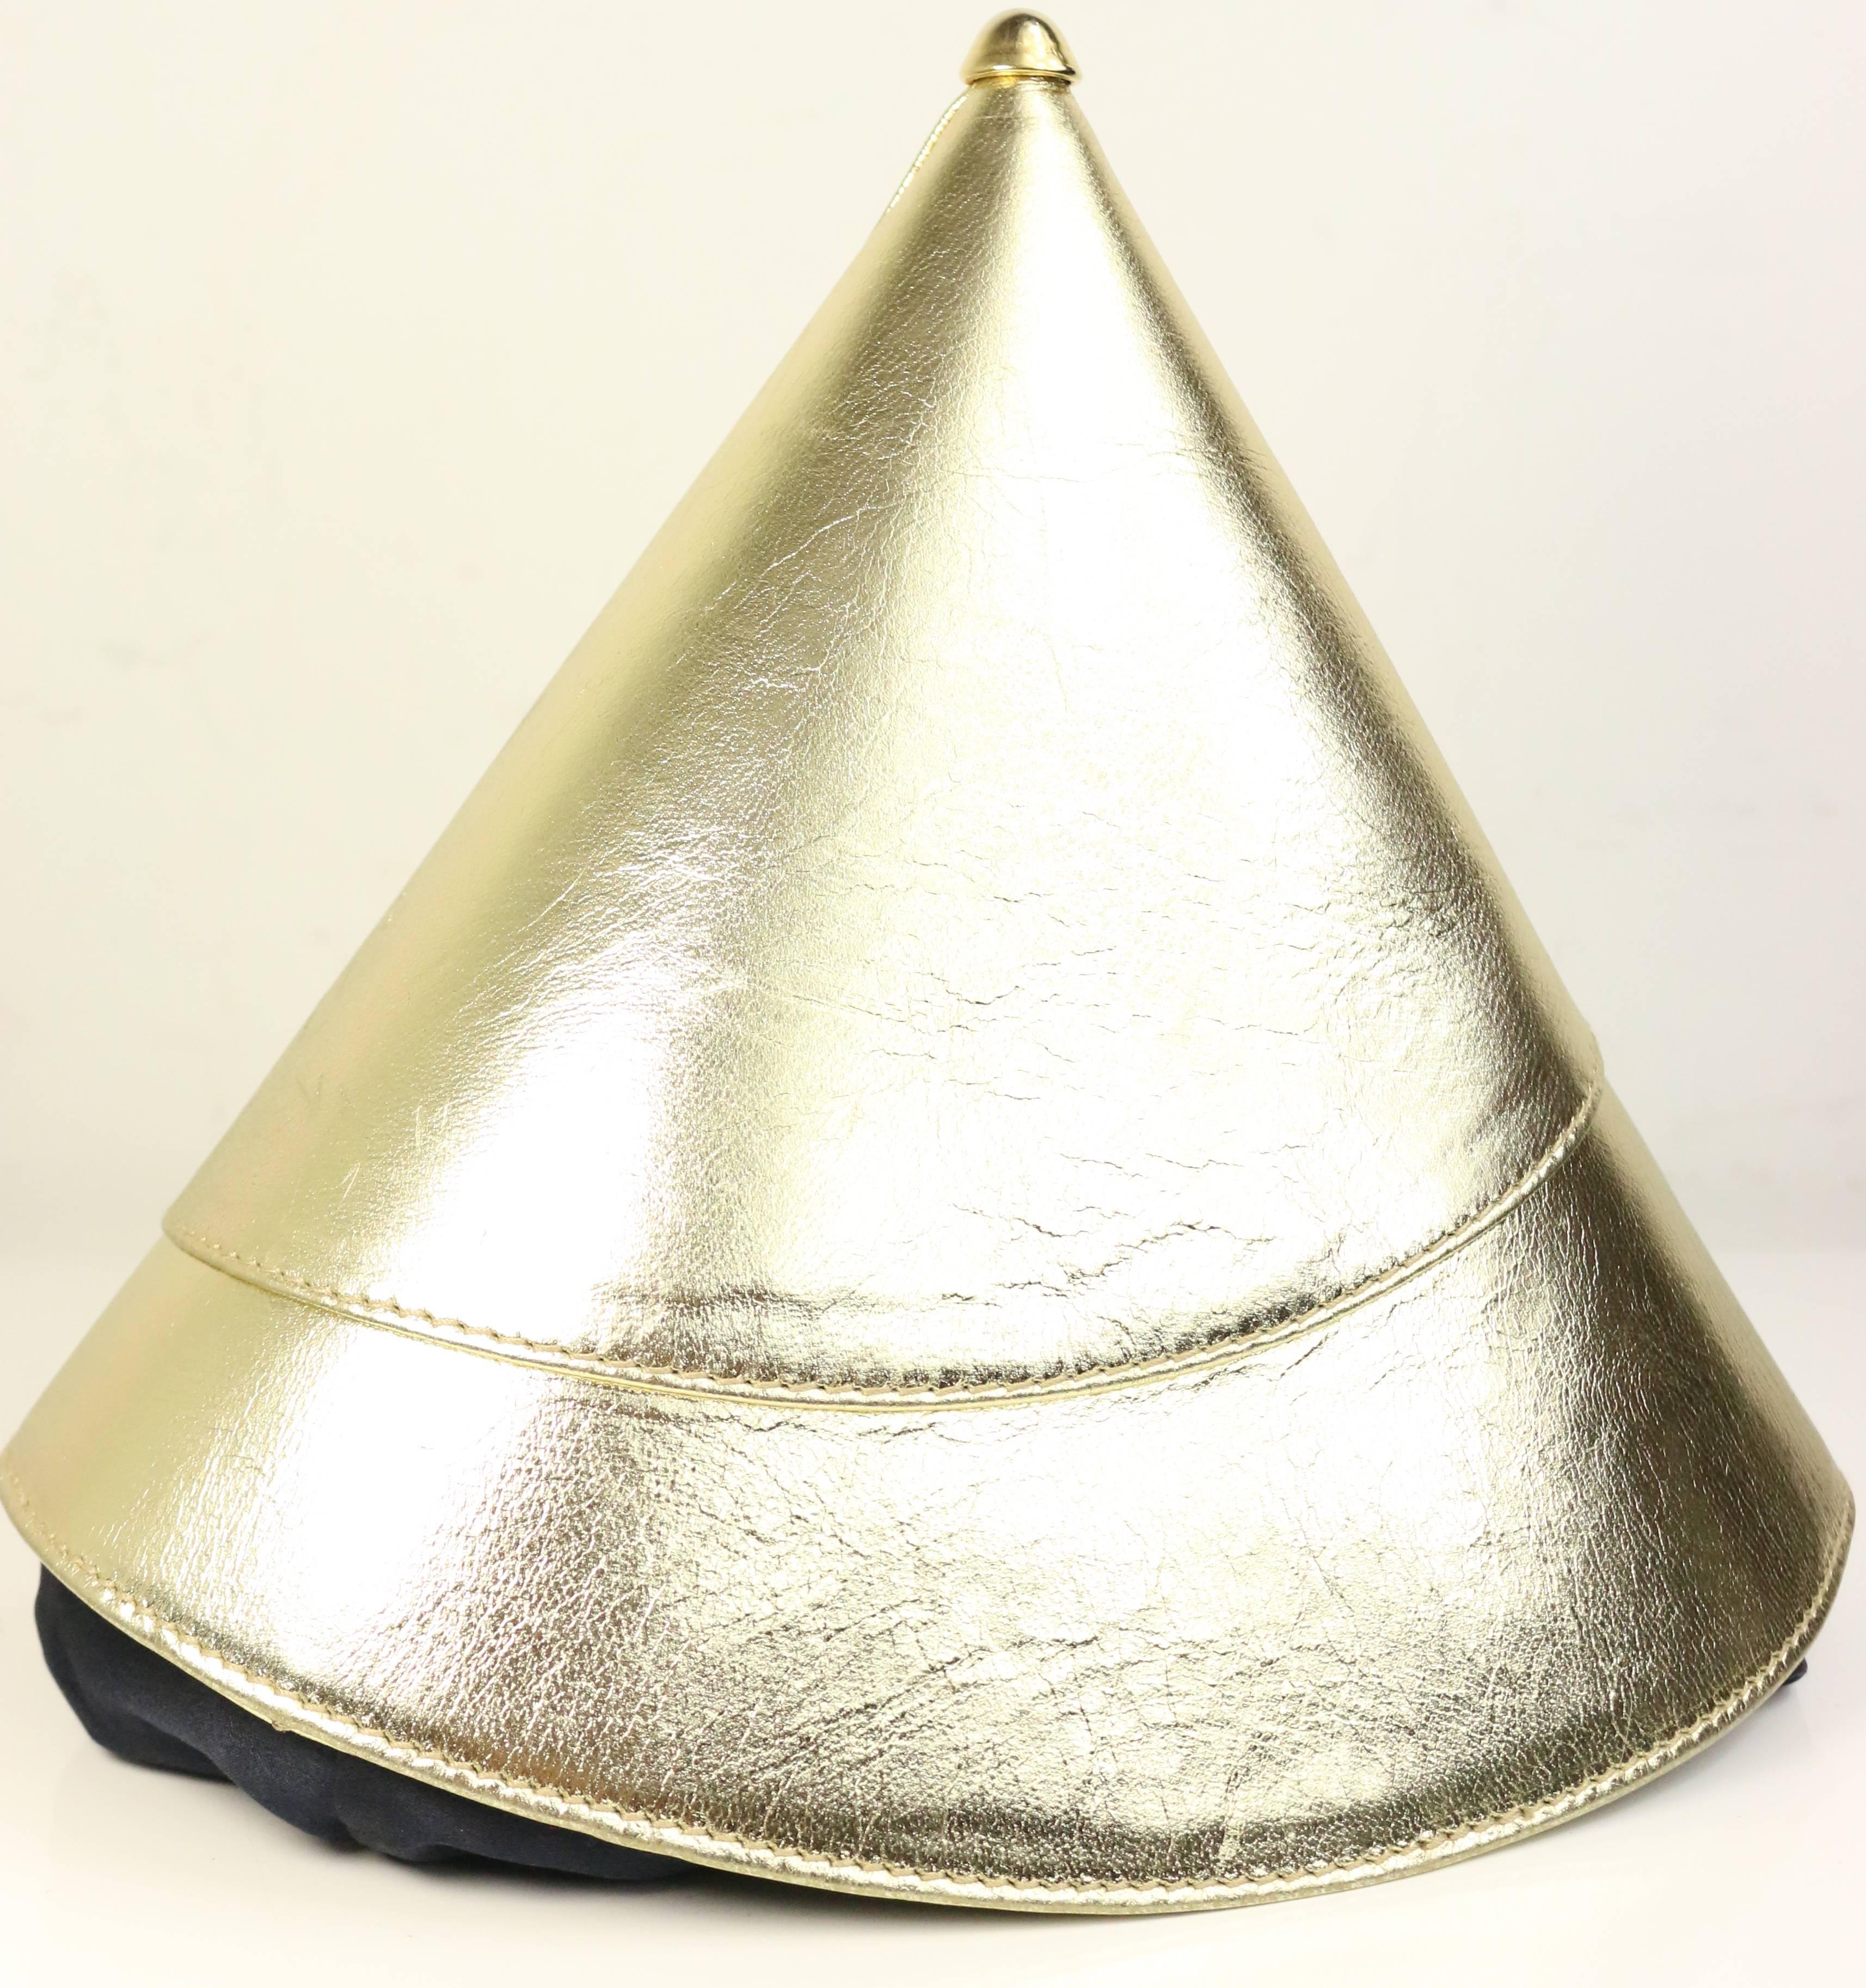 - Vintage 80s Escada gold metallic leather party hat shape handbag. This is a very unique, chic design and one of a kind handbag! You can carry it as a clutch as well.

- Featuring black satin drawstring closing and white/gold stripe lining with